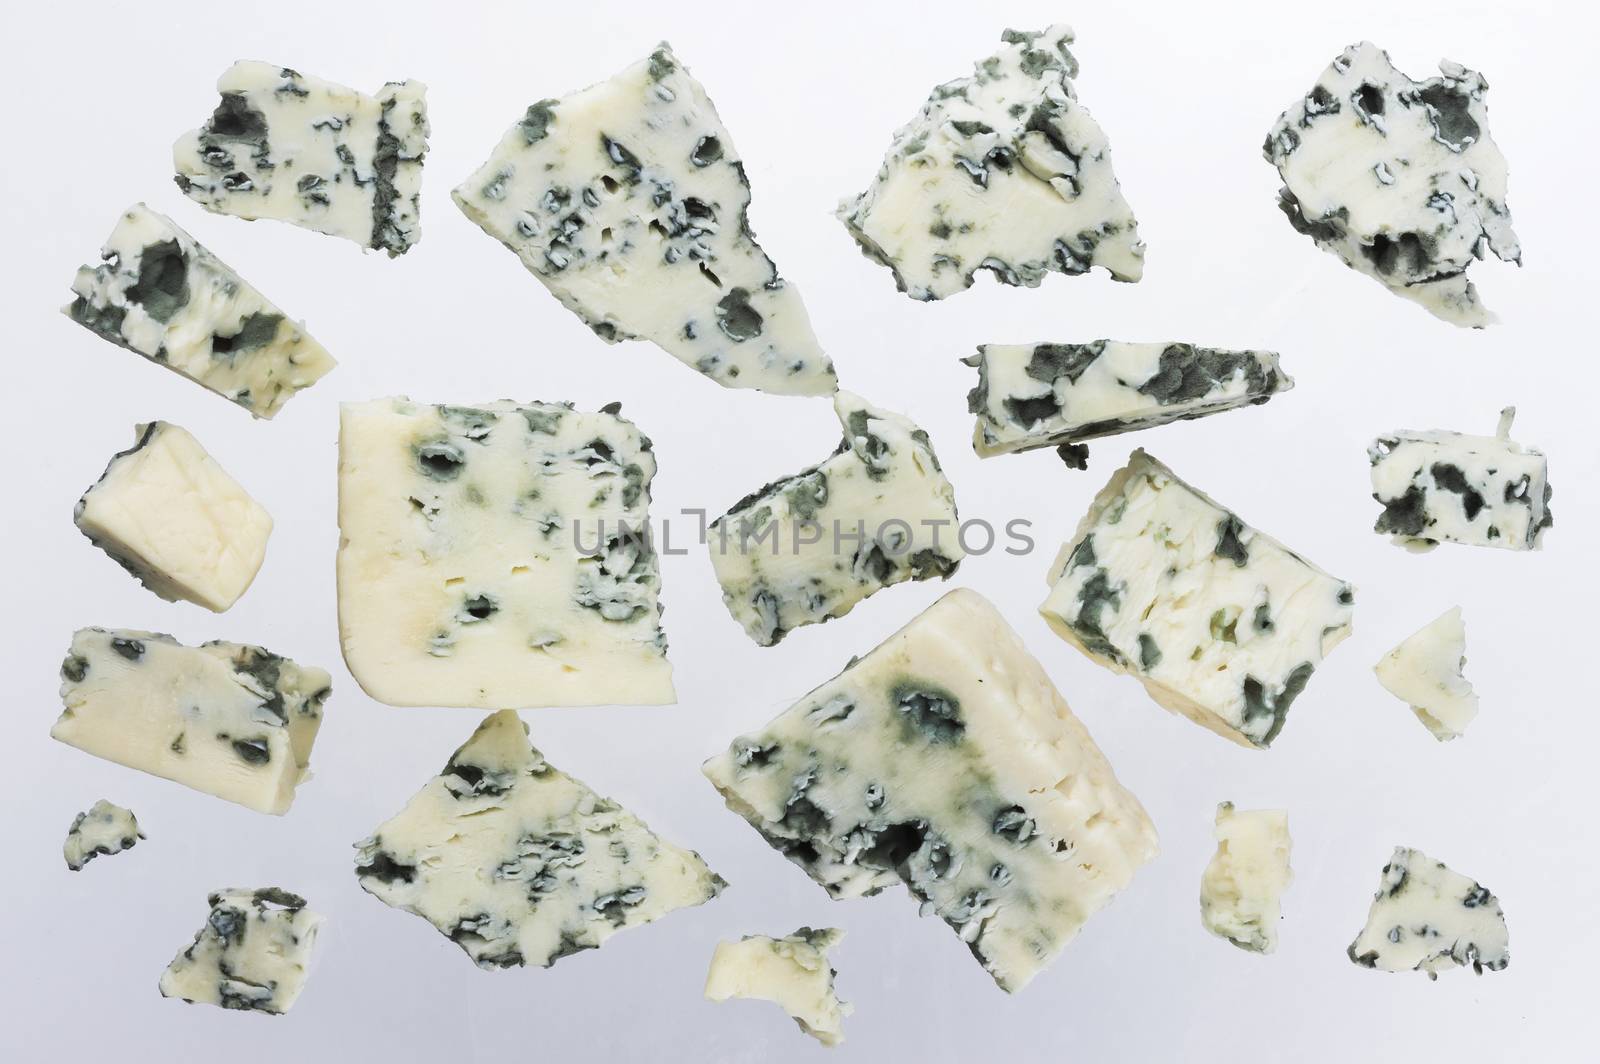 Blue cheese collection by xamtiw